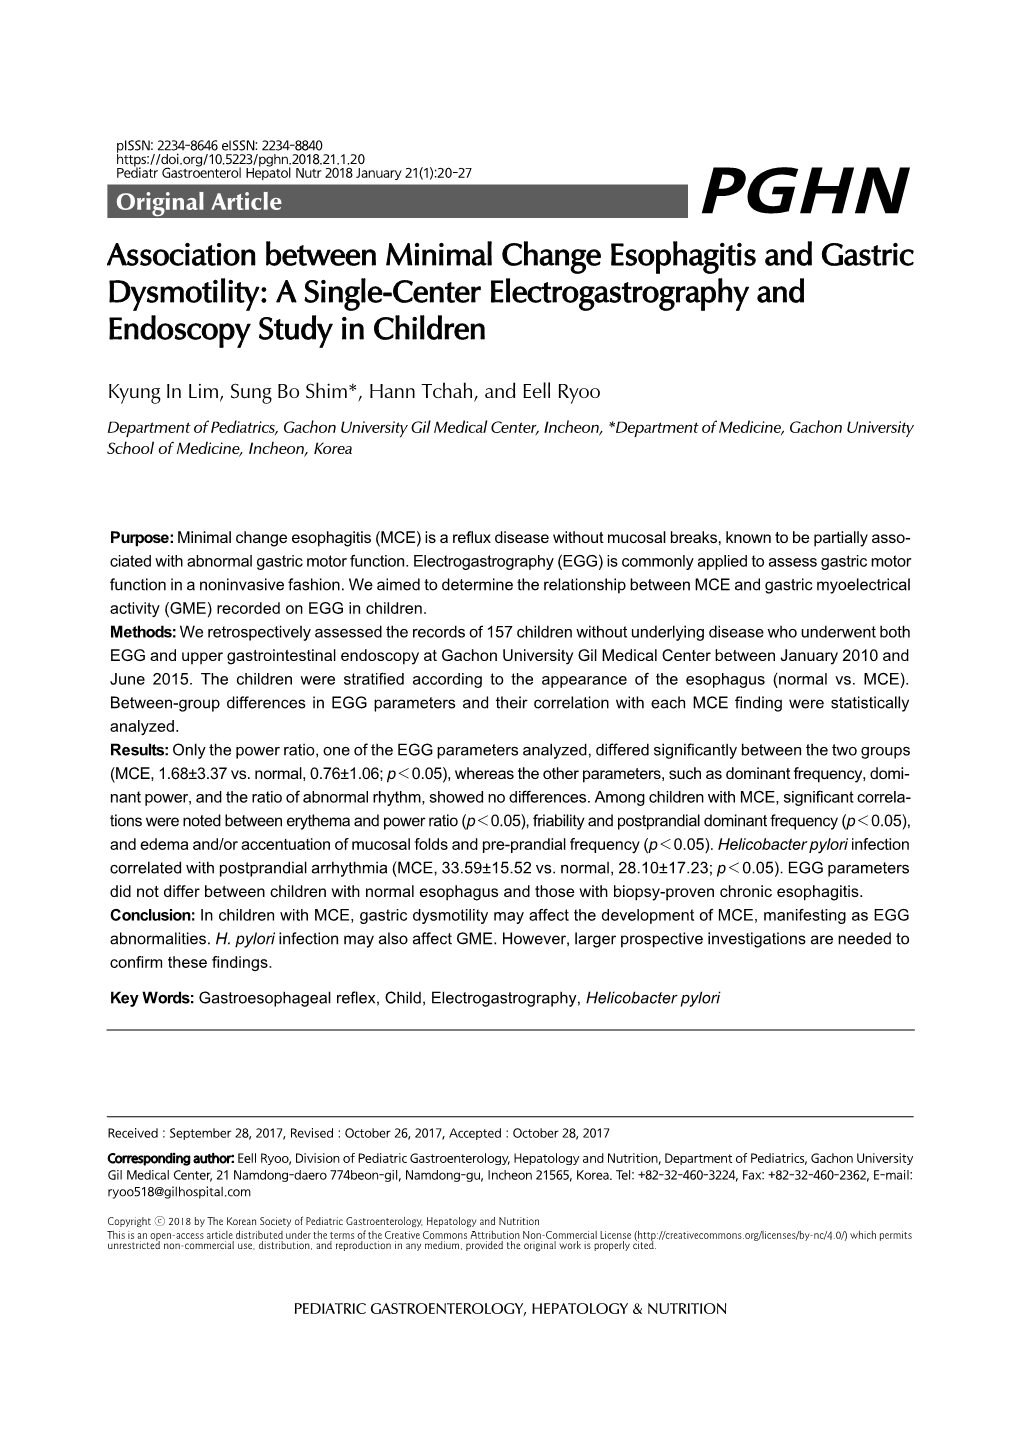 Association Between Minimal Change Esophagitis and Gastric Dysmotility: a Single-Center Electrogastrography and Endoscopy Study in Children